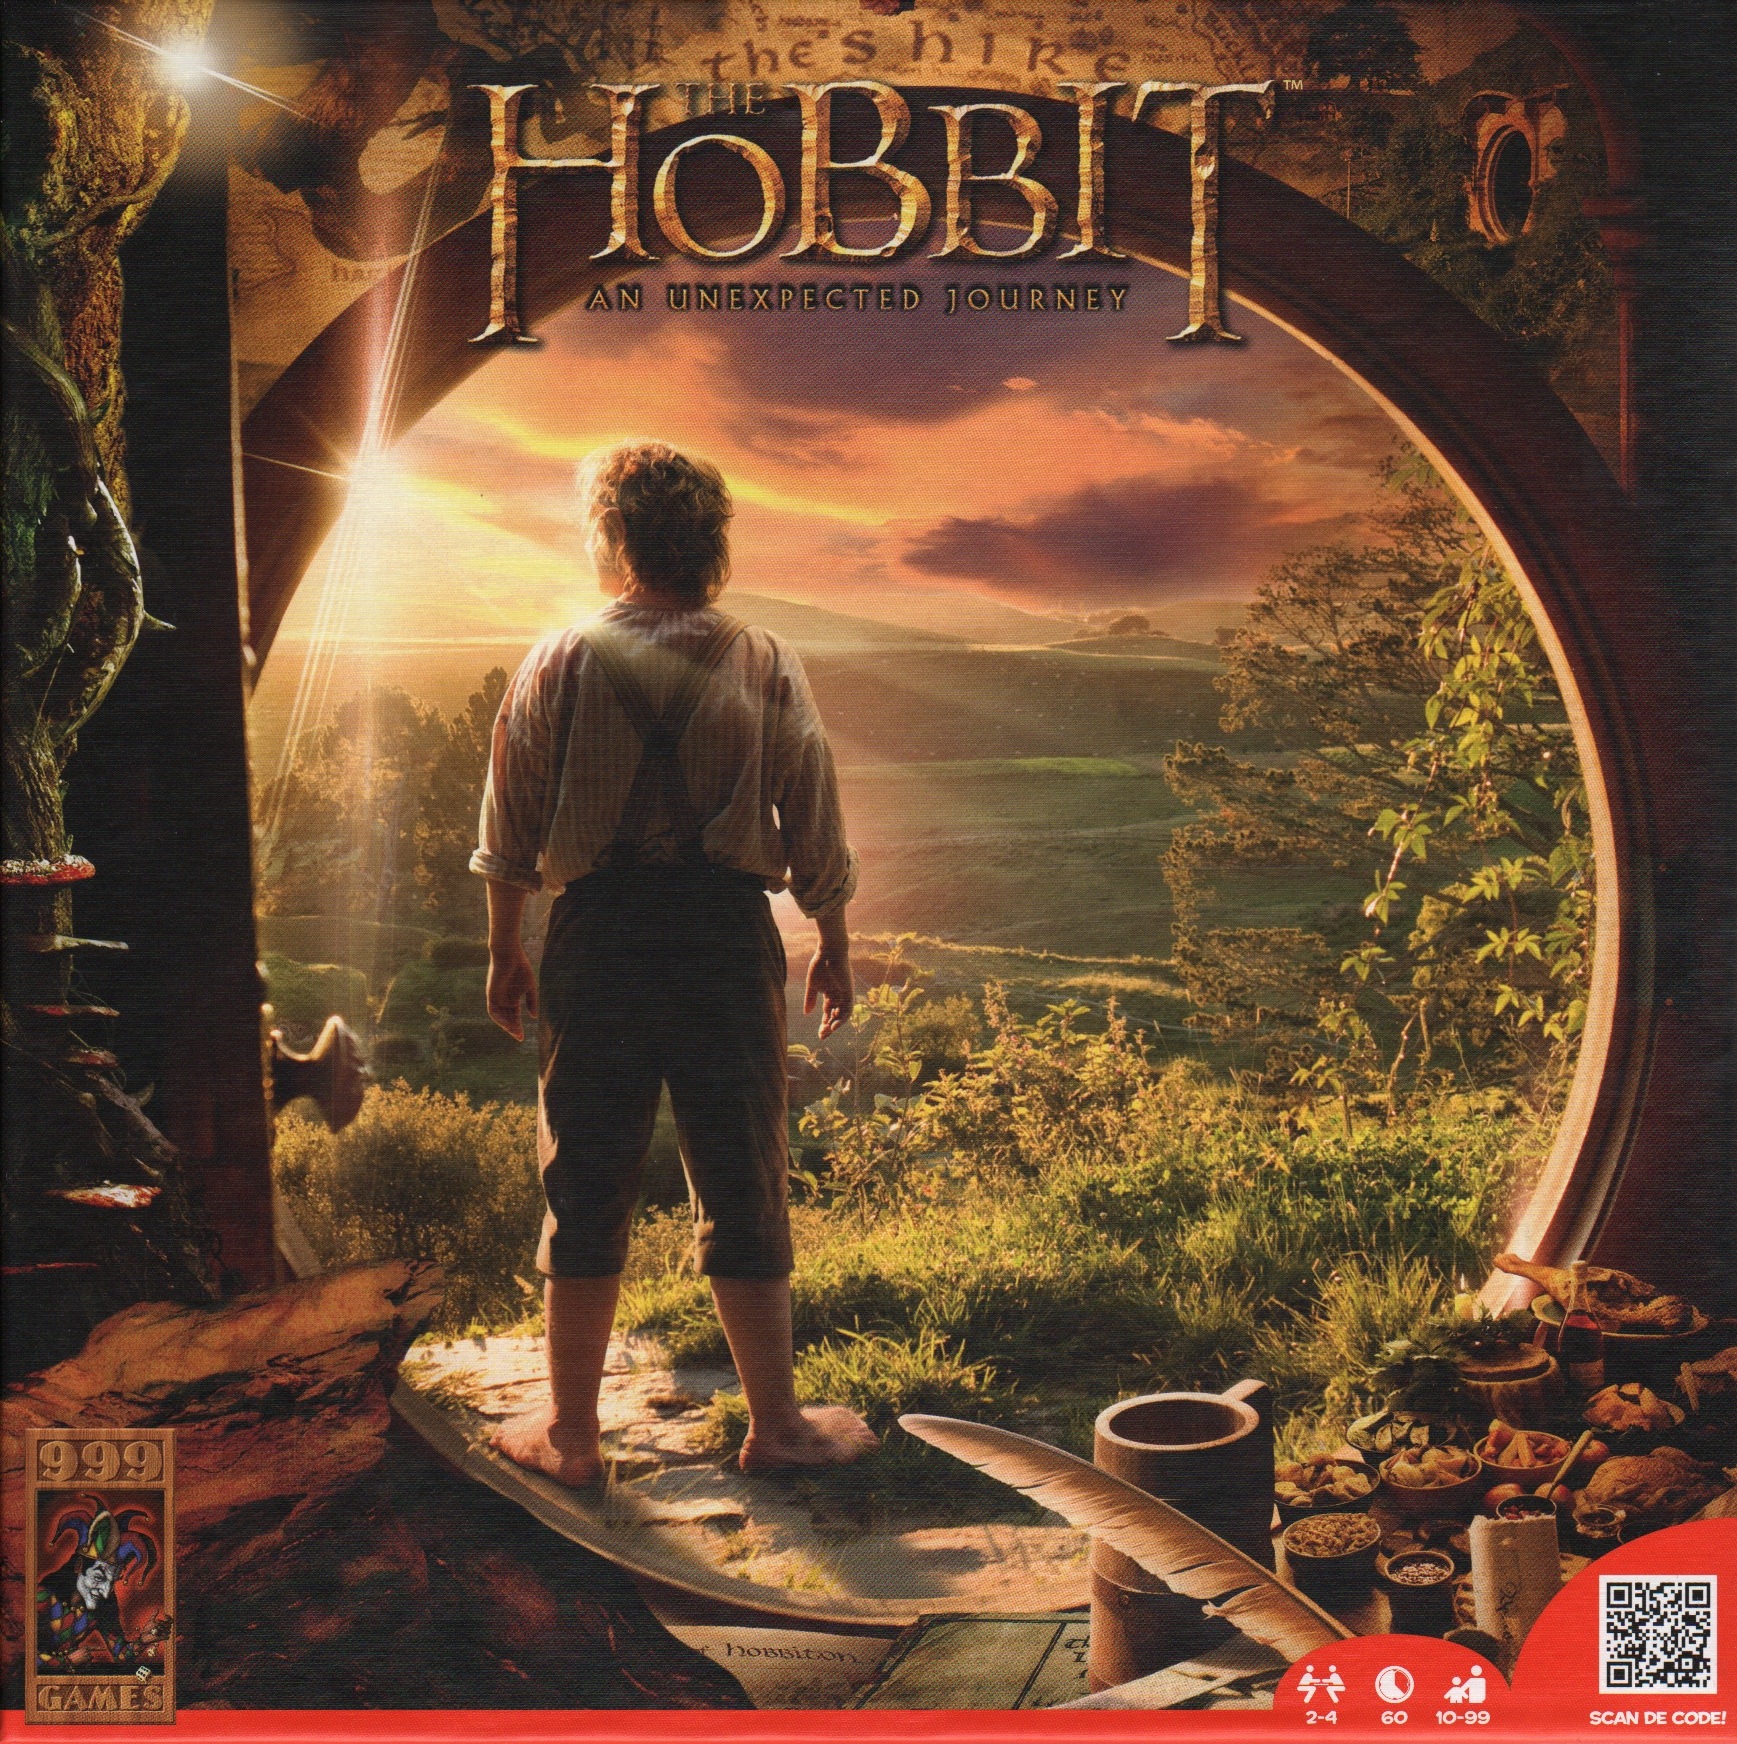 The Hobbit: an Unexpected Journey